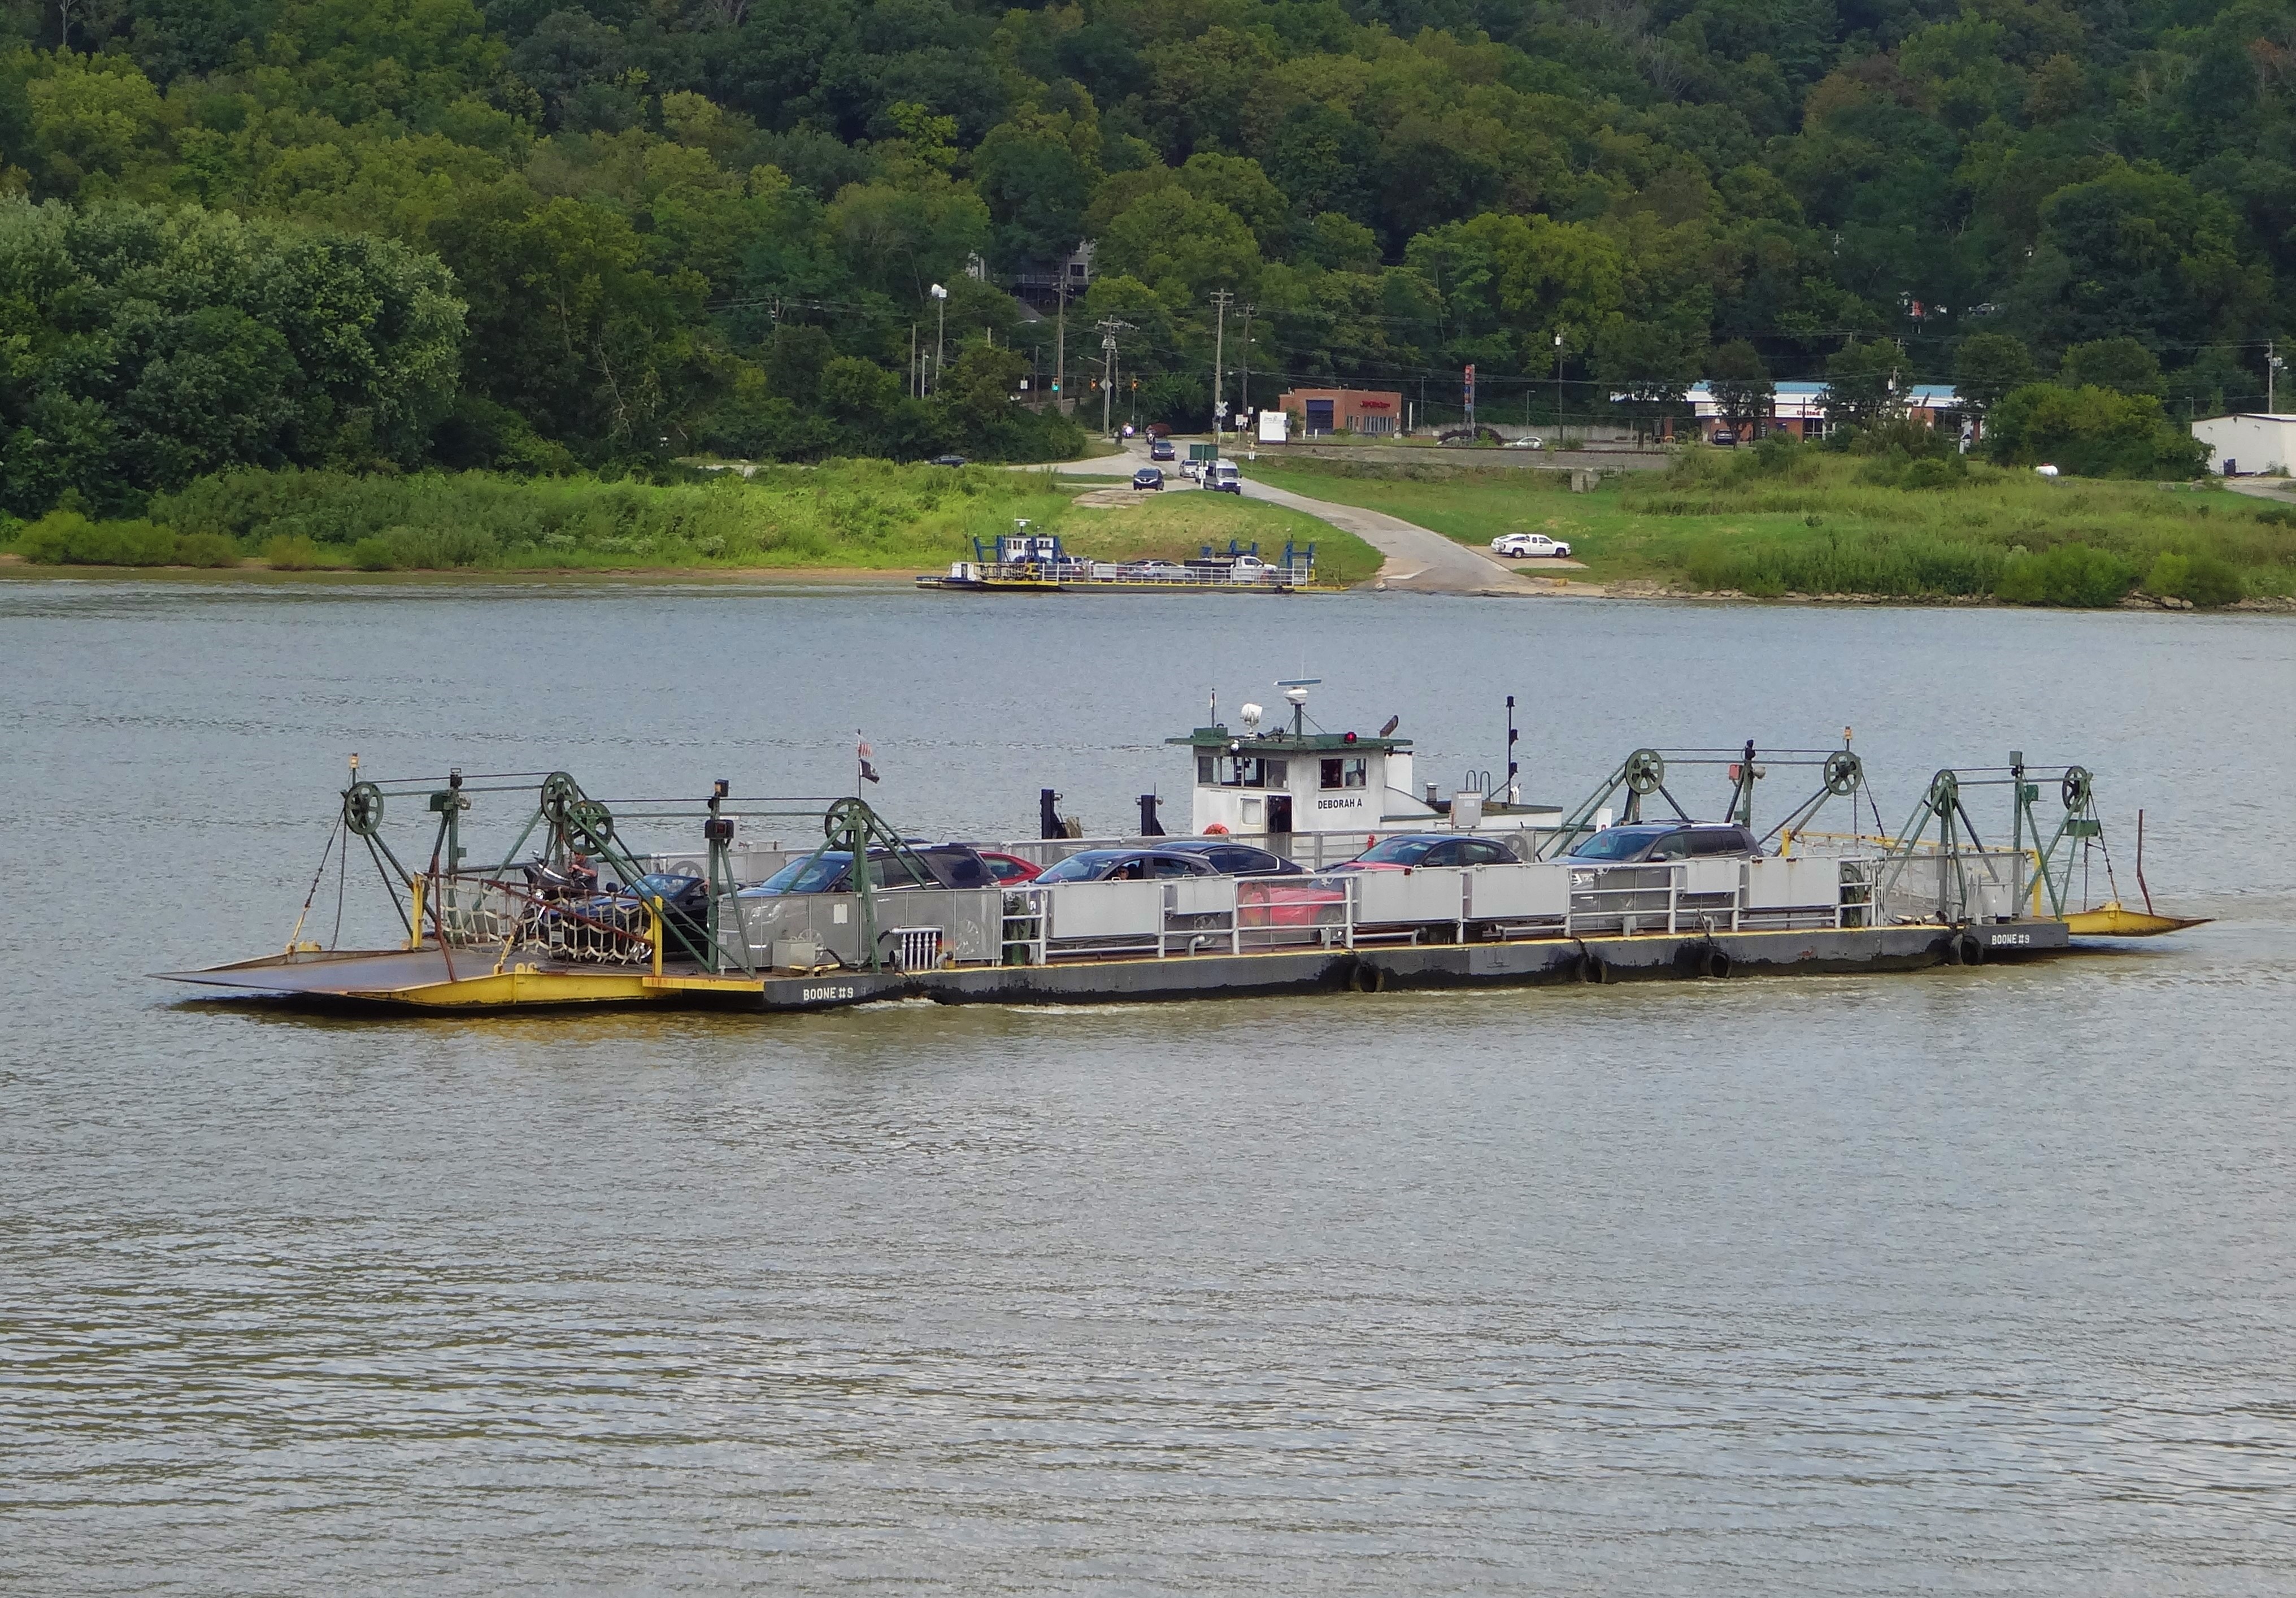 Anderson Ferryboat ferrying vehicles across the Ohio River